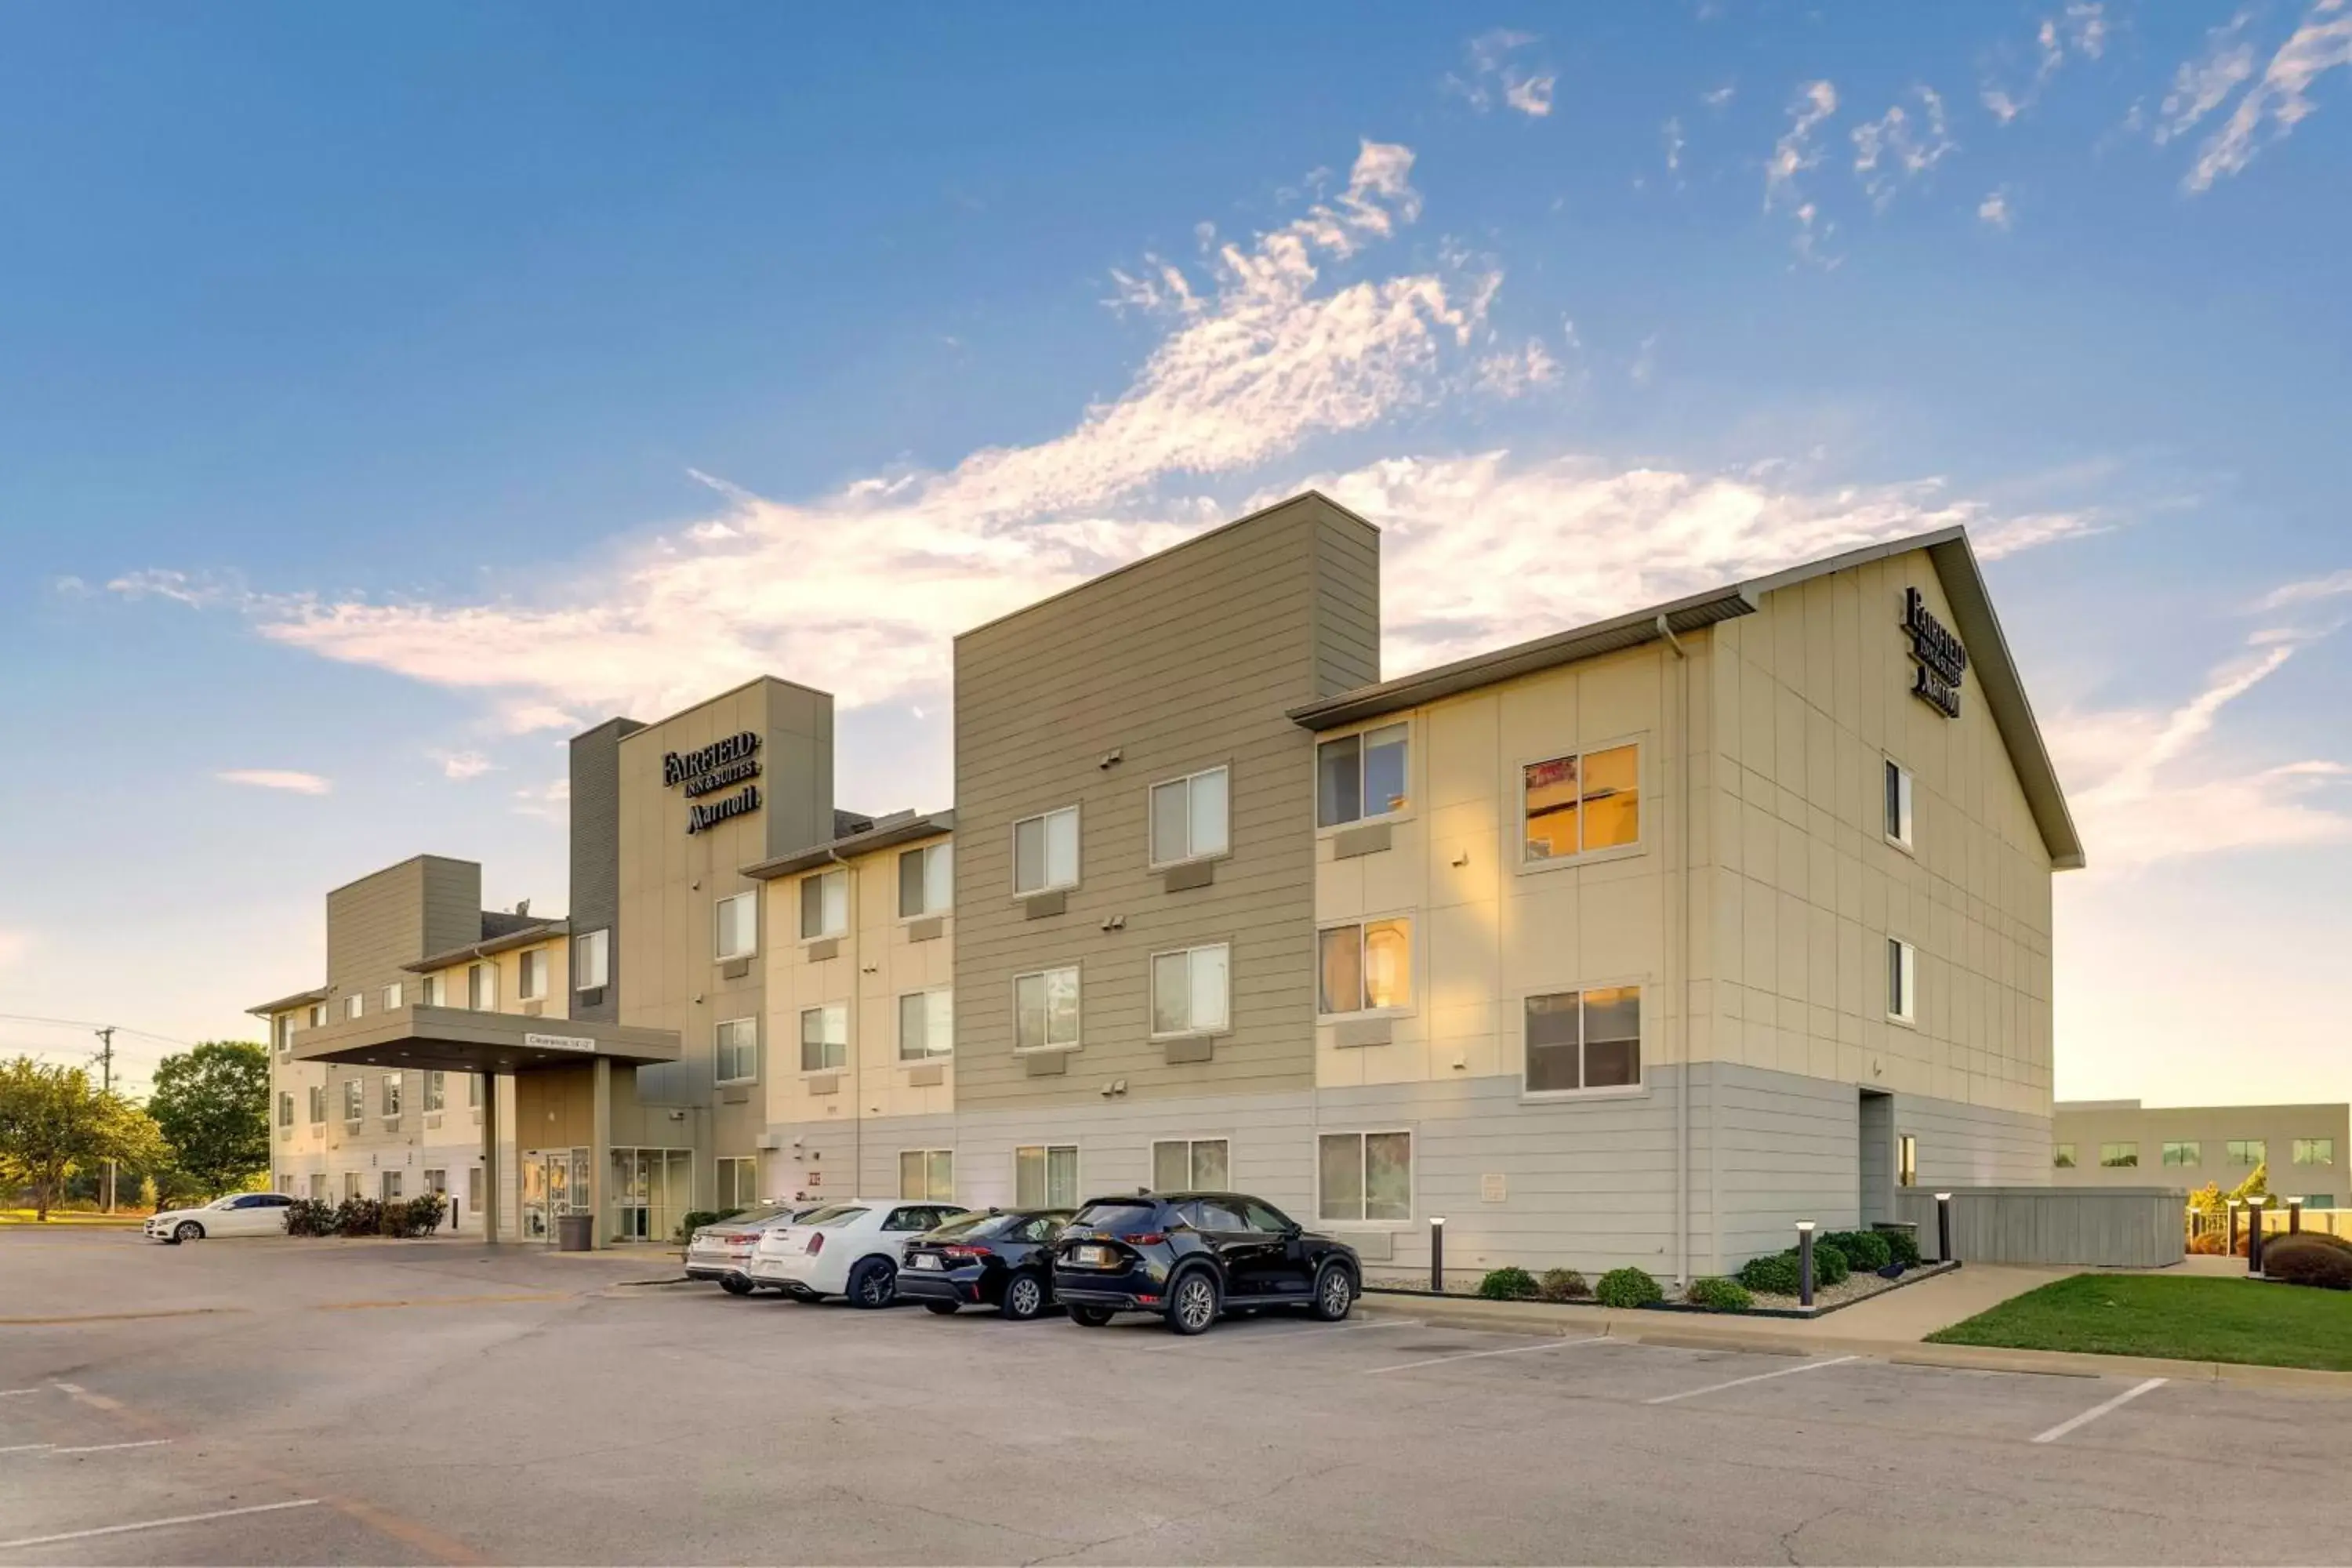 Property Building in Fairfield Inn & Suites by Marriott Fort Worth I-30 West Near NAS JRB